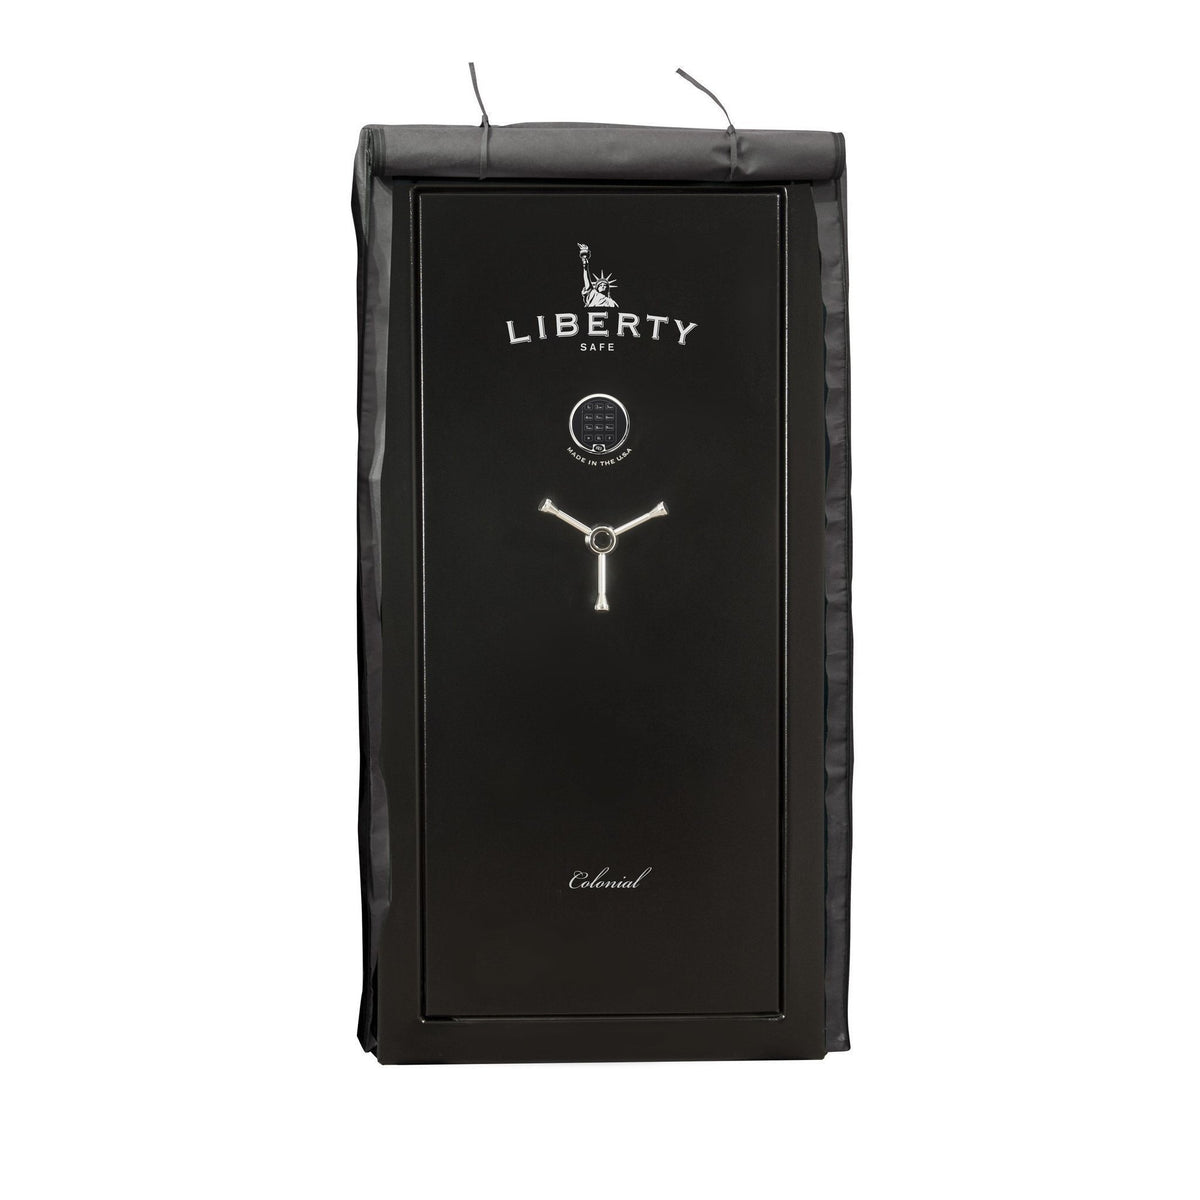 Liberty Safe-accessory-security-safe-cover-20-25-size-safes